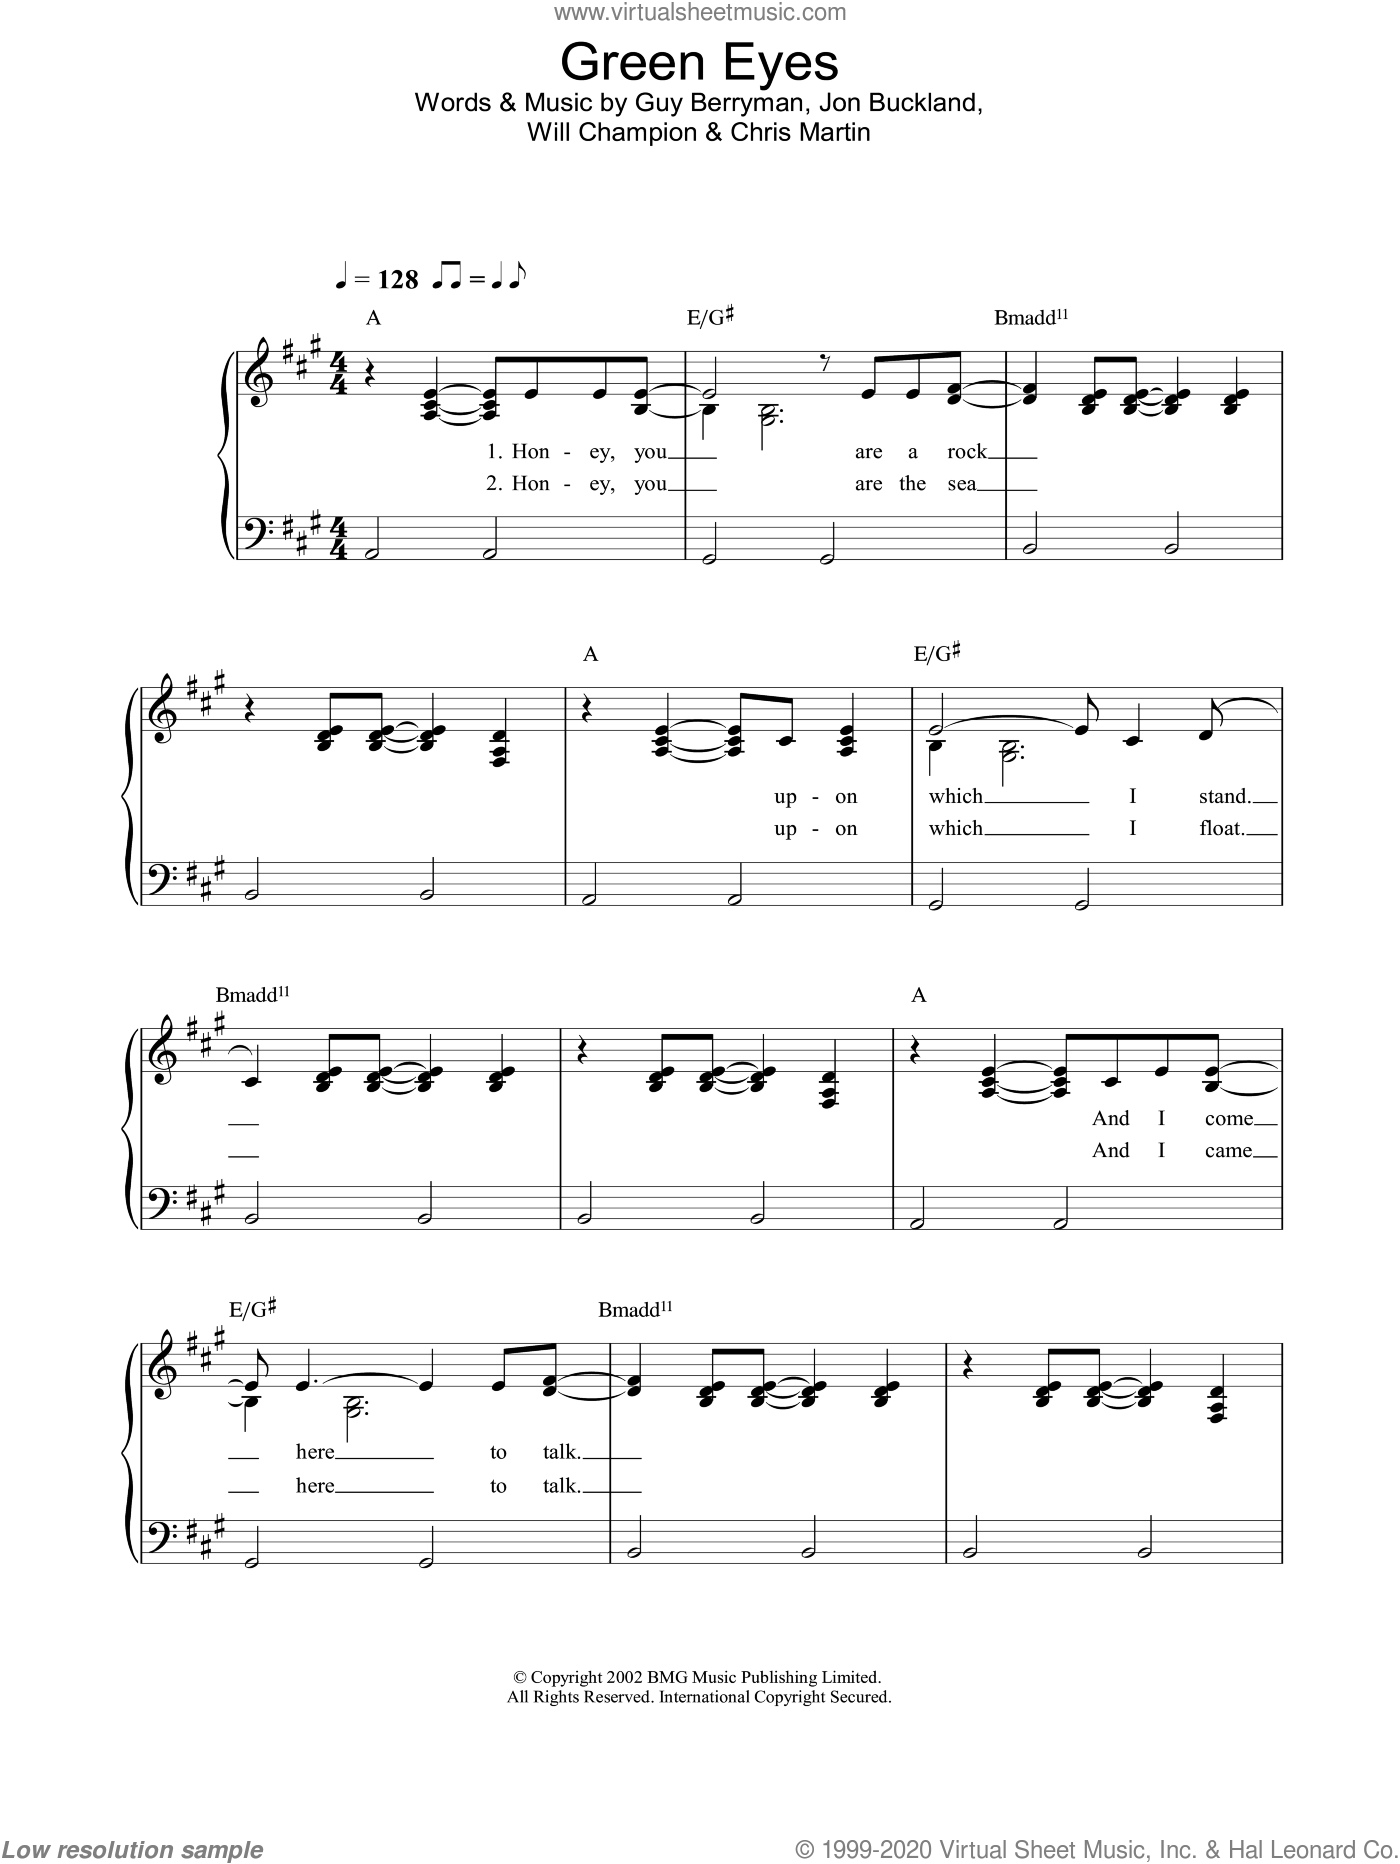 Coldplay - Green Eyes sheet music for piano solo v2